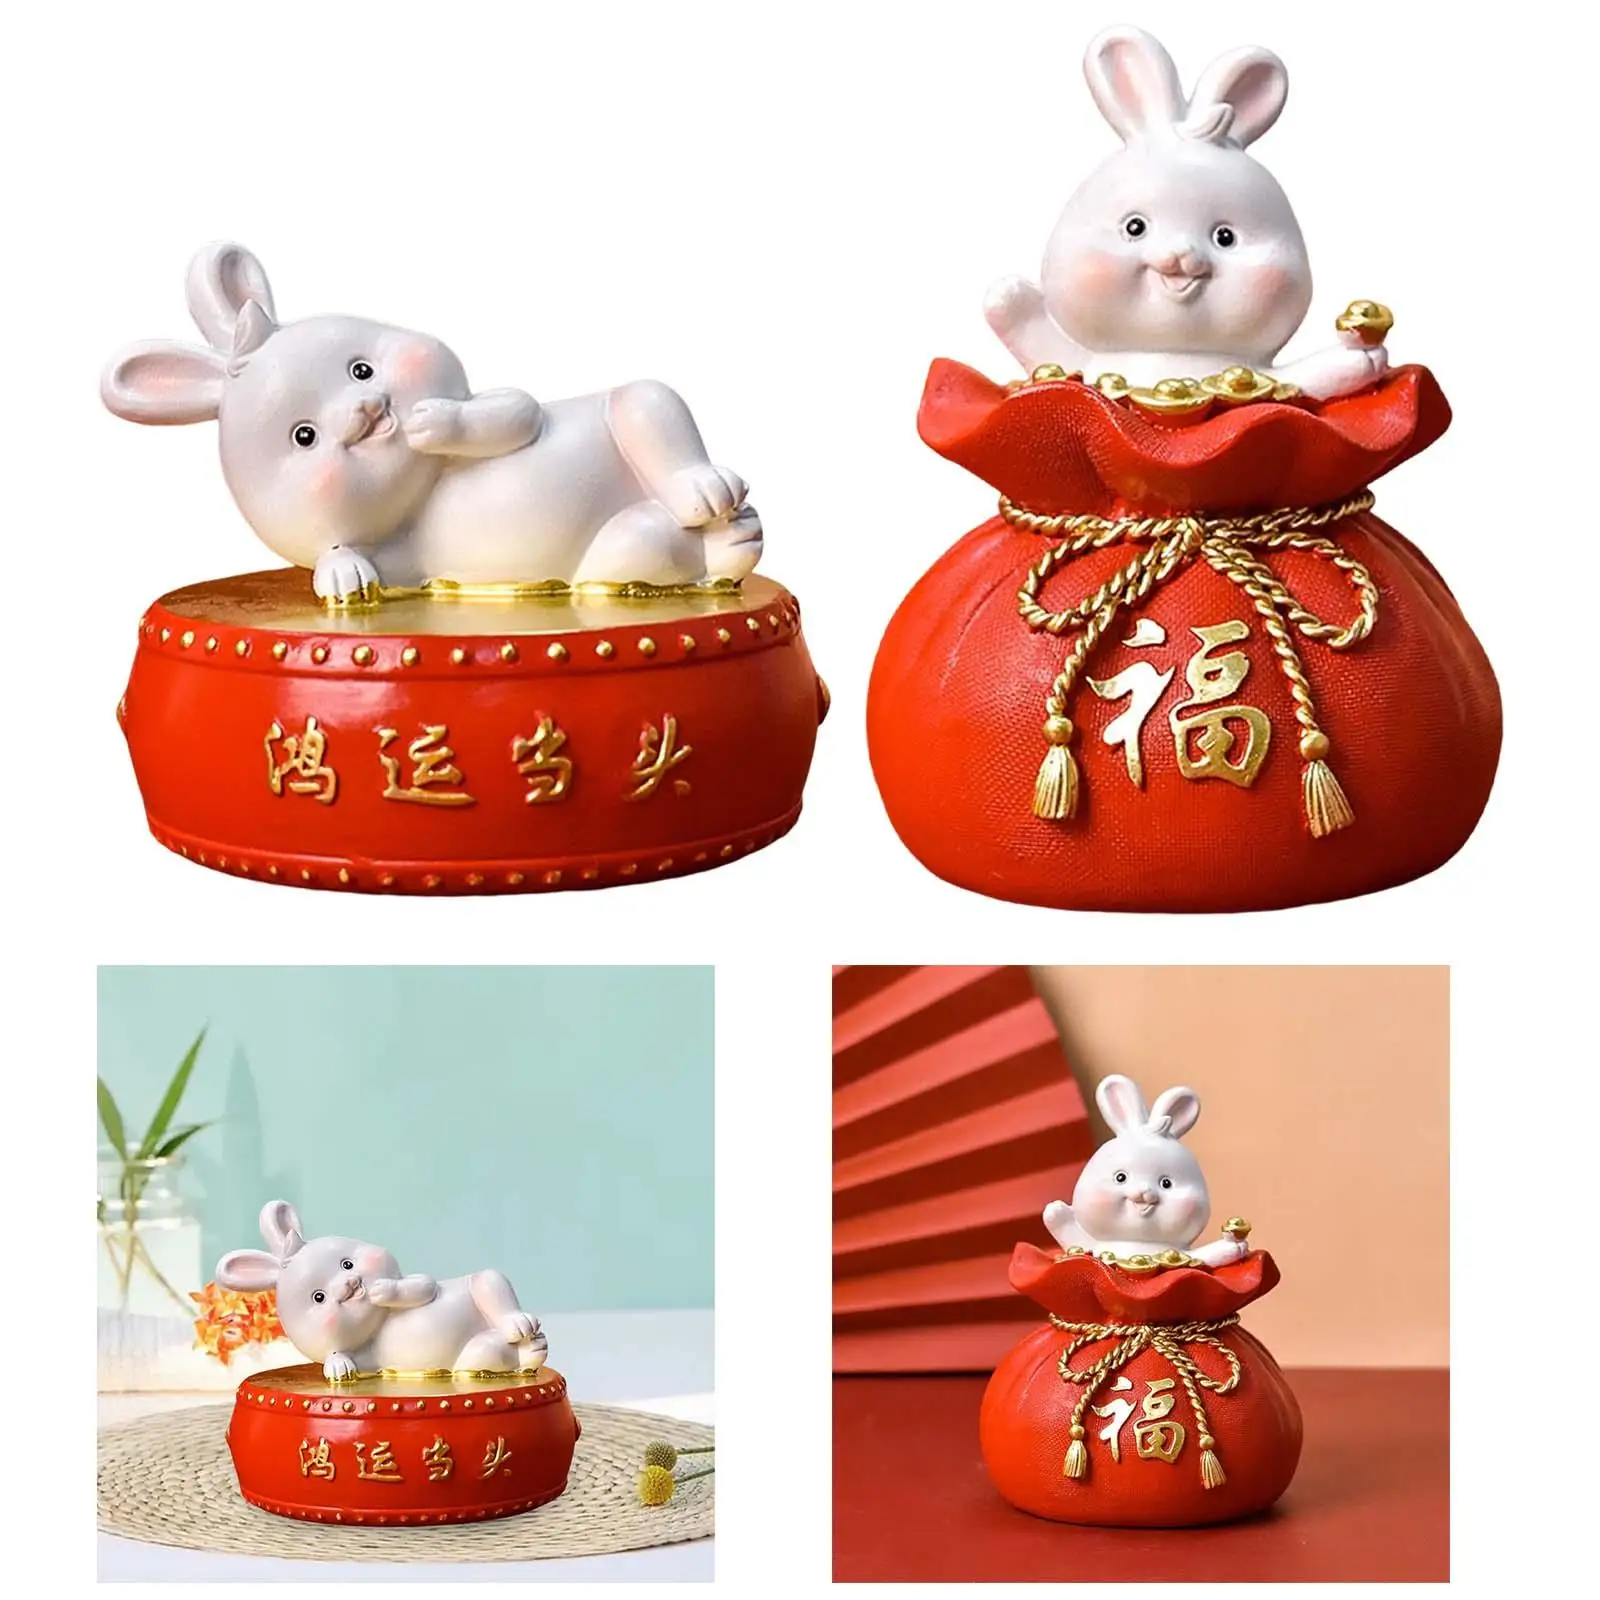 Lucky Rabbit Statue Money Box Figurines Ornament for Spring Festival Cabinet